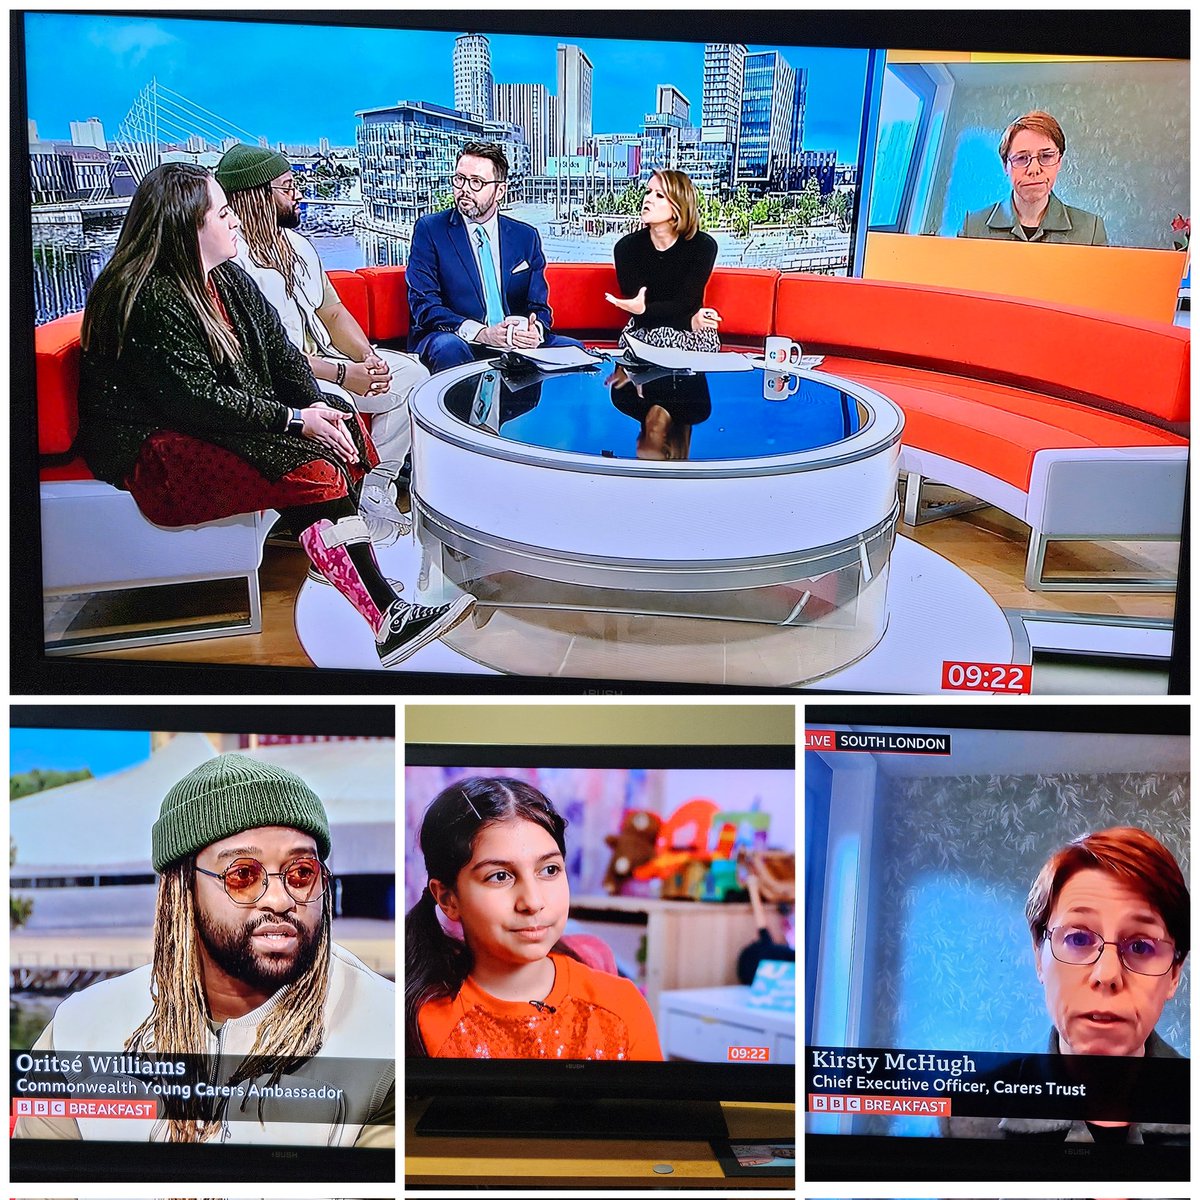 Today's @BBCBreakfast featured a powerful piece on young carers. As well as @CarersTrust, Commonwealth Young Carer champion @Oritse and a number of brilliant young carers, it also highlighted the stark findings from our recent landmark inquiry - carers.org/all-party-parl…